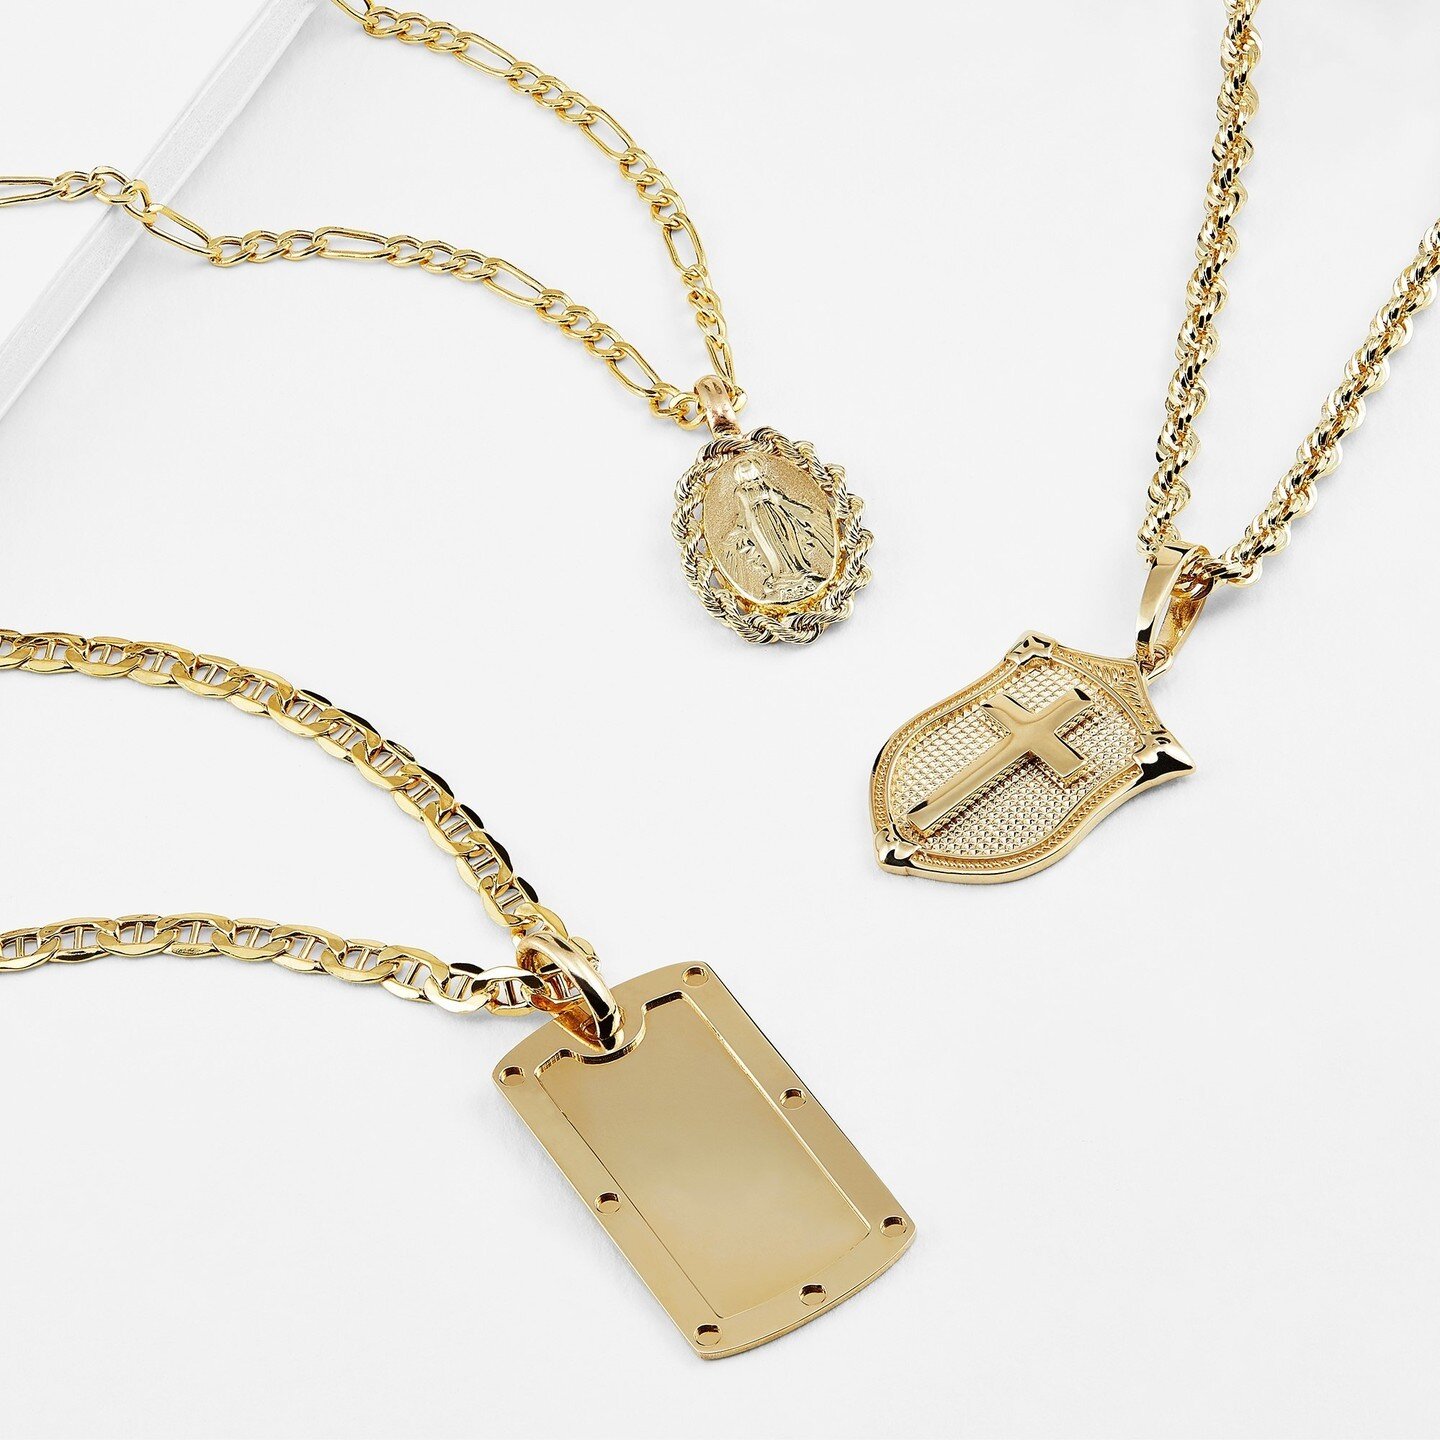 Make a statement with these bold necklaces. Show the world who you are!⁠
⁠
#gold #migm #mensfashion #mayisgoldmonth⁠